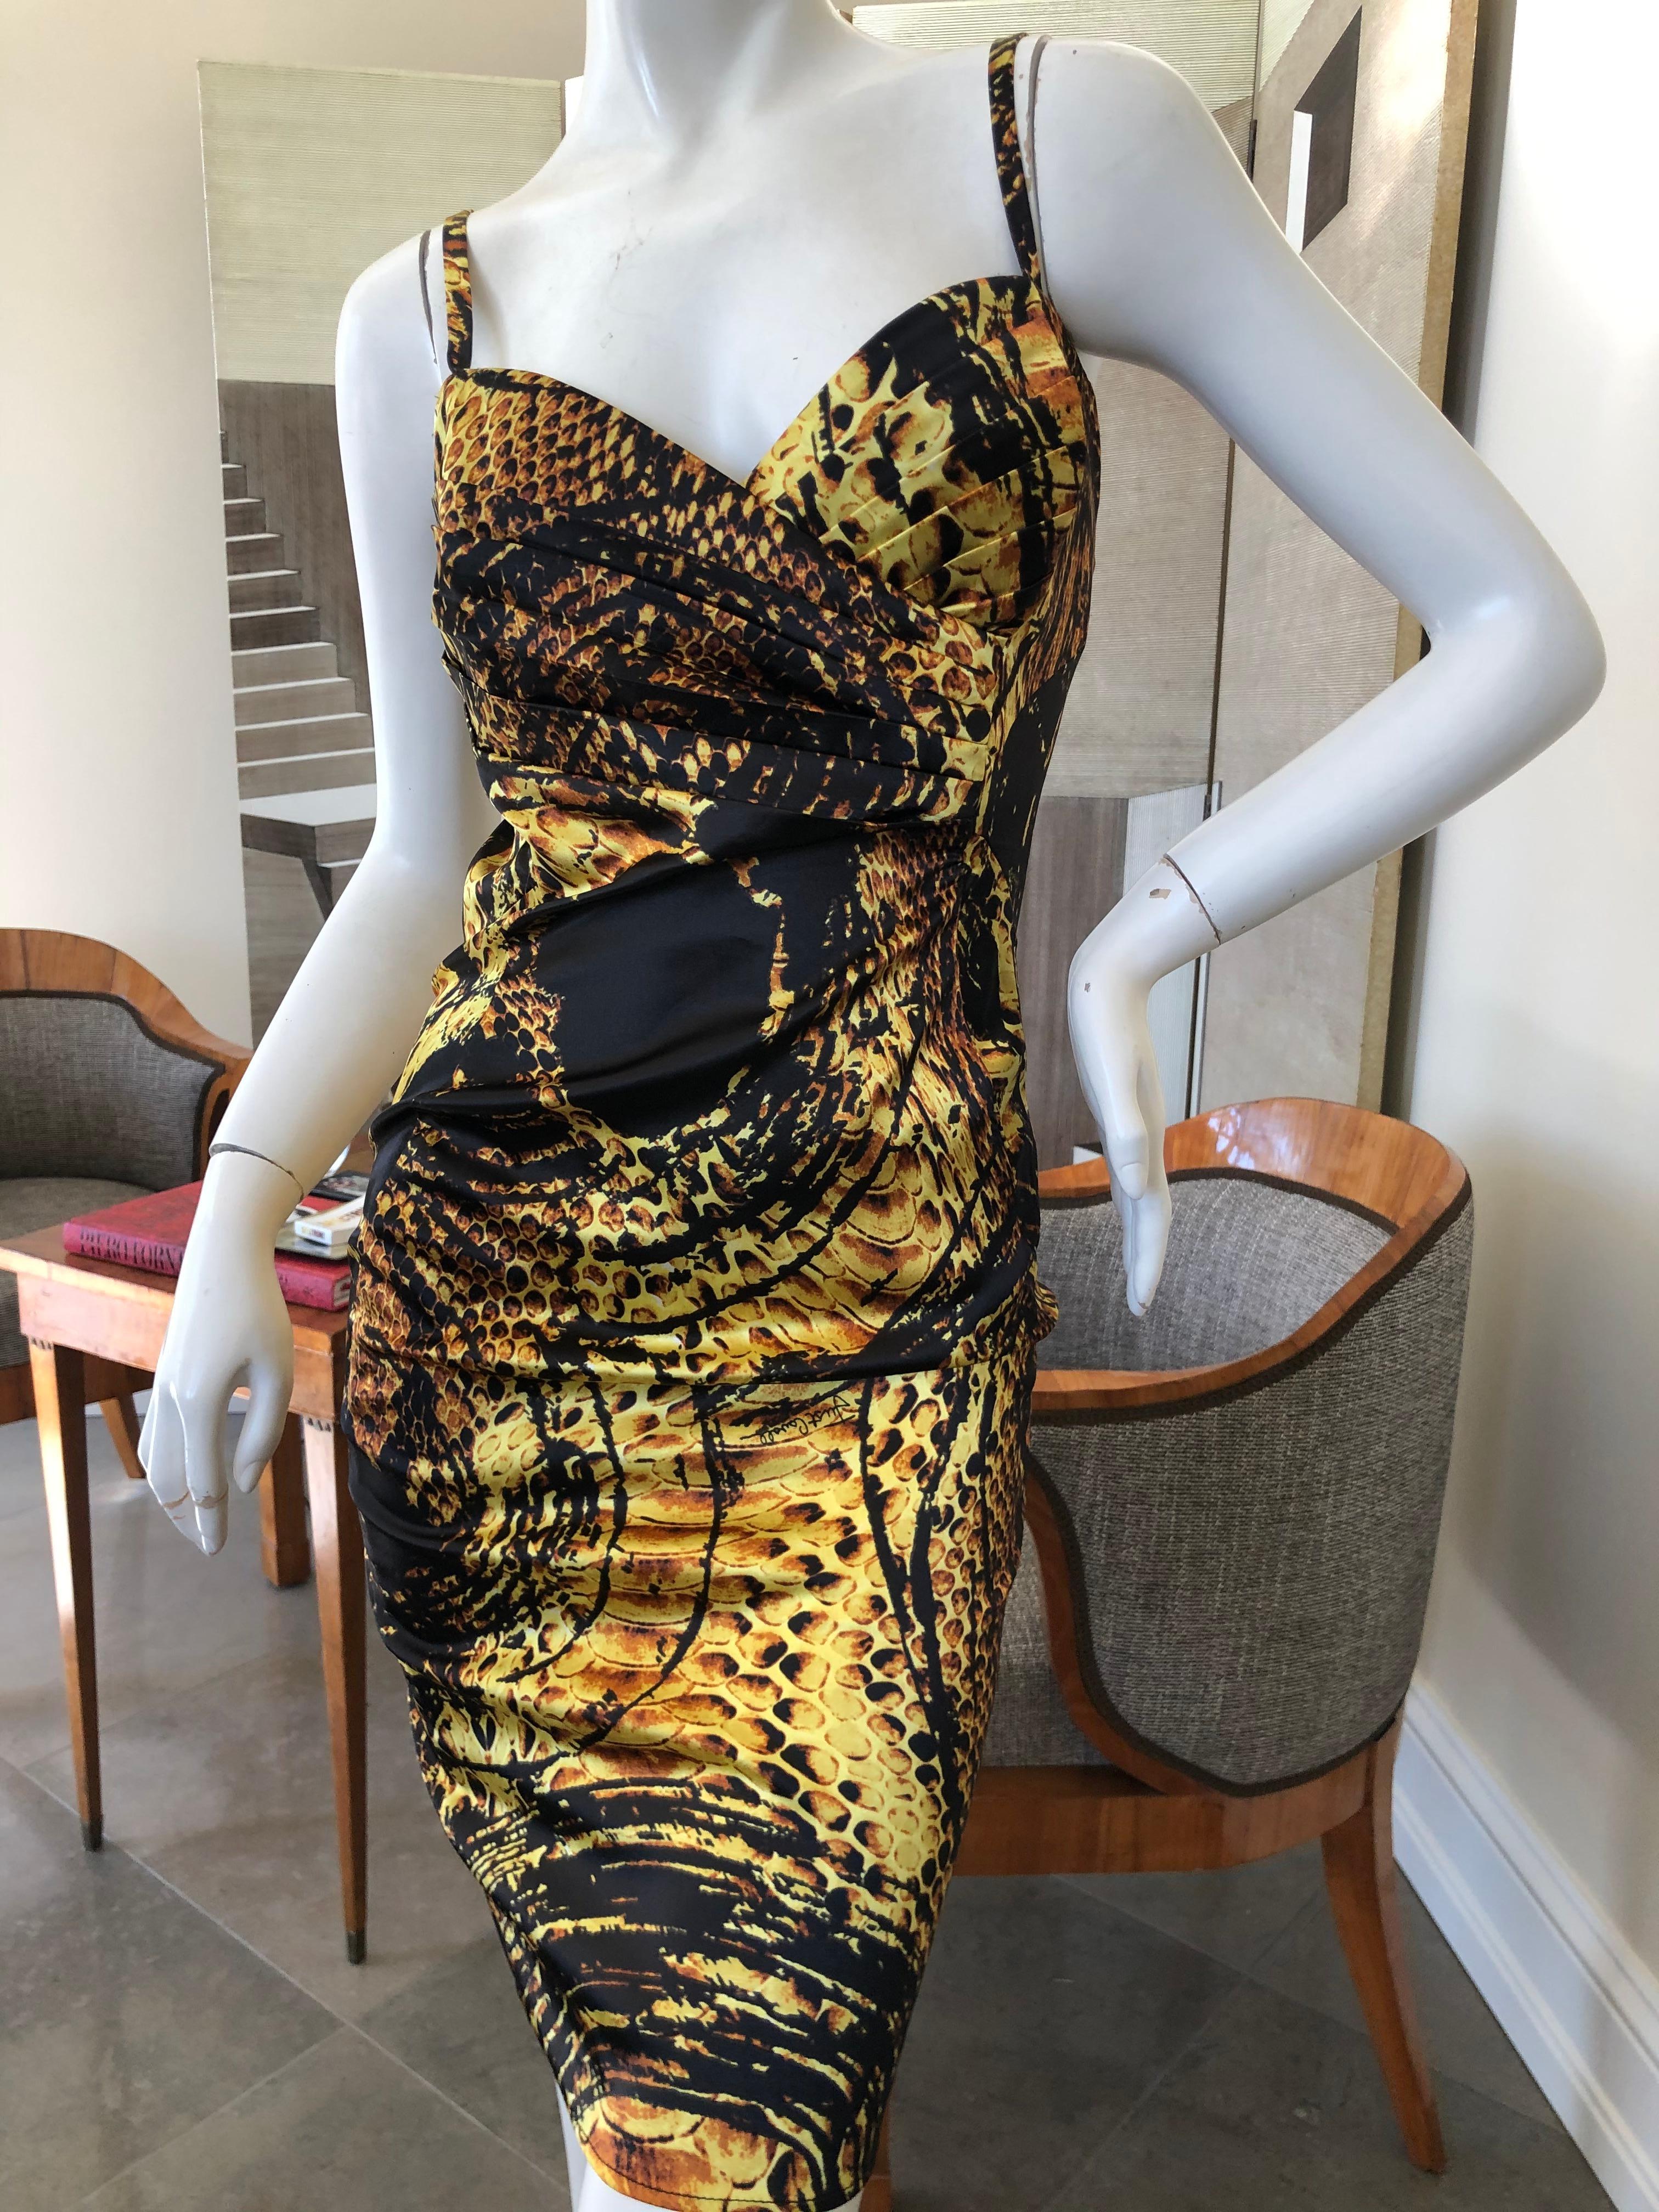 Roberto Cavalli Gold Reptile Print Evening Dress for Just Cavalli

Size 42, but runs small
 Bust 34